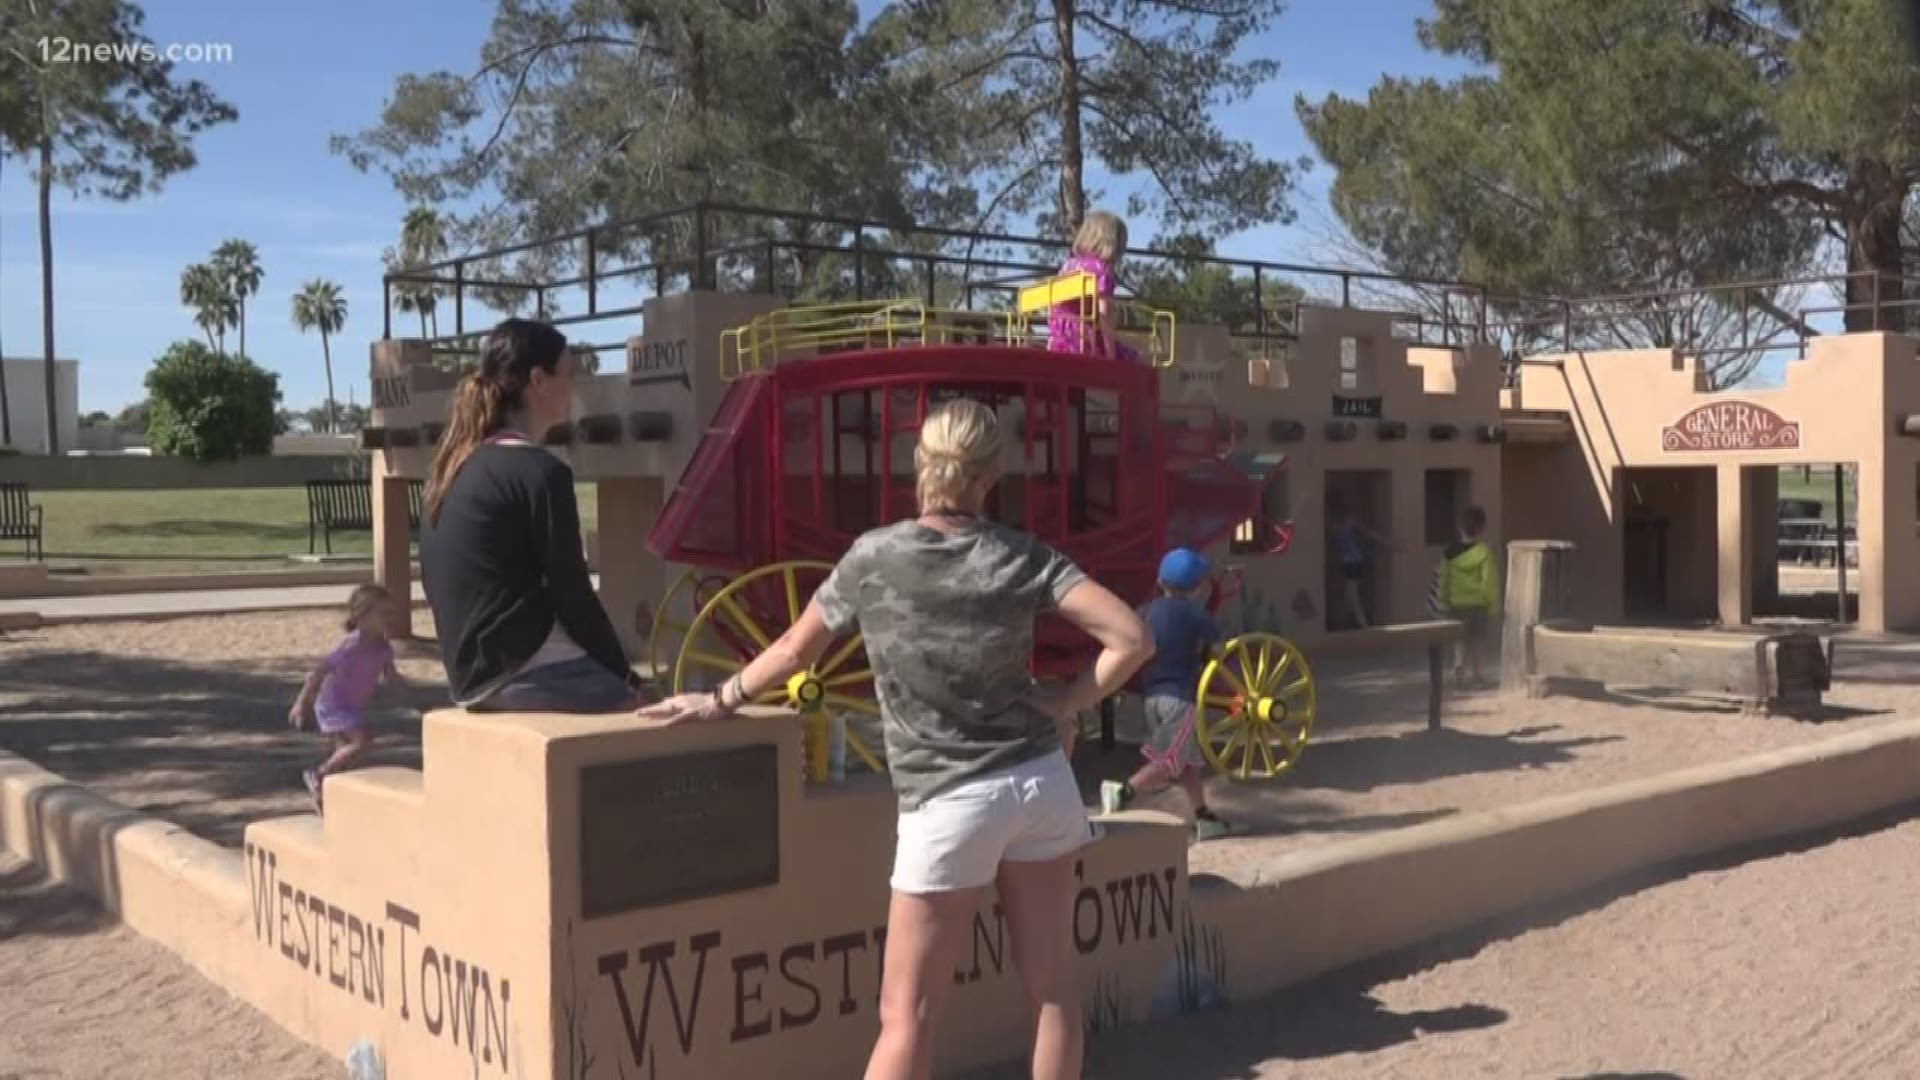 The McCormick-Stillman Railroad Park was recently named the best park in the U.S. Monica Garcia gives us a tour of the popular Scottsdale park.